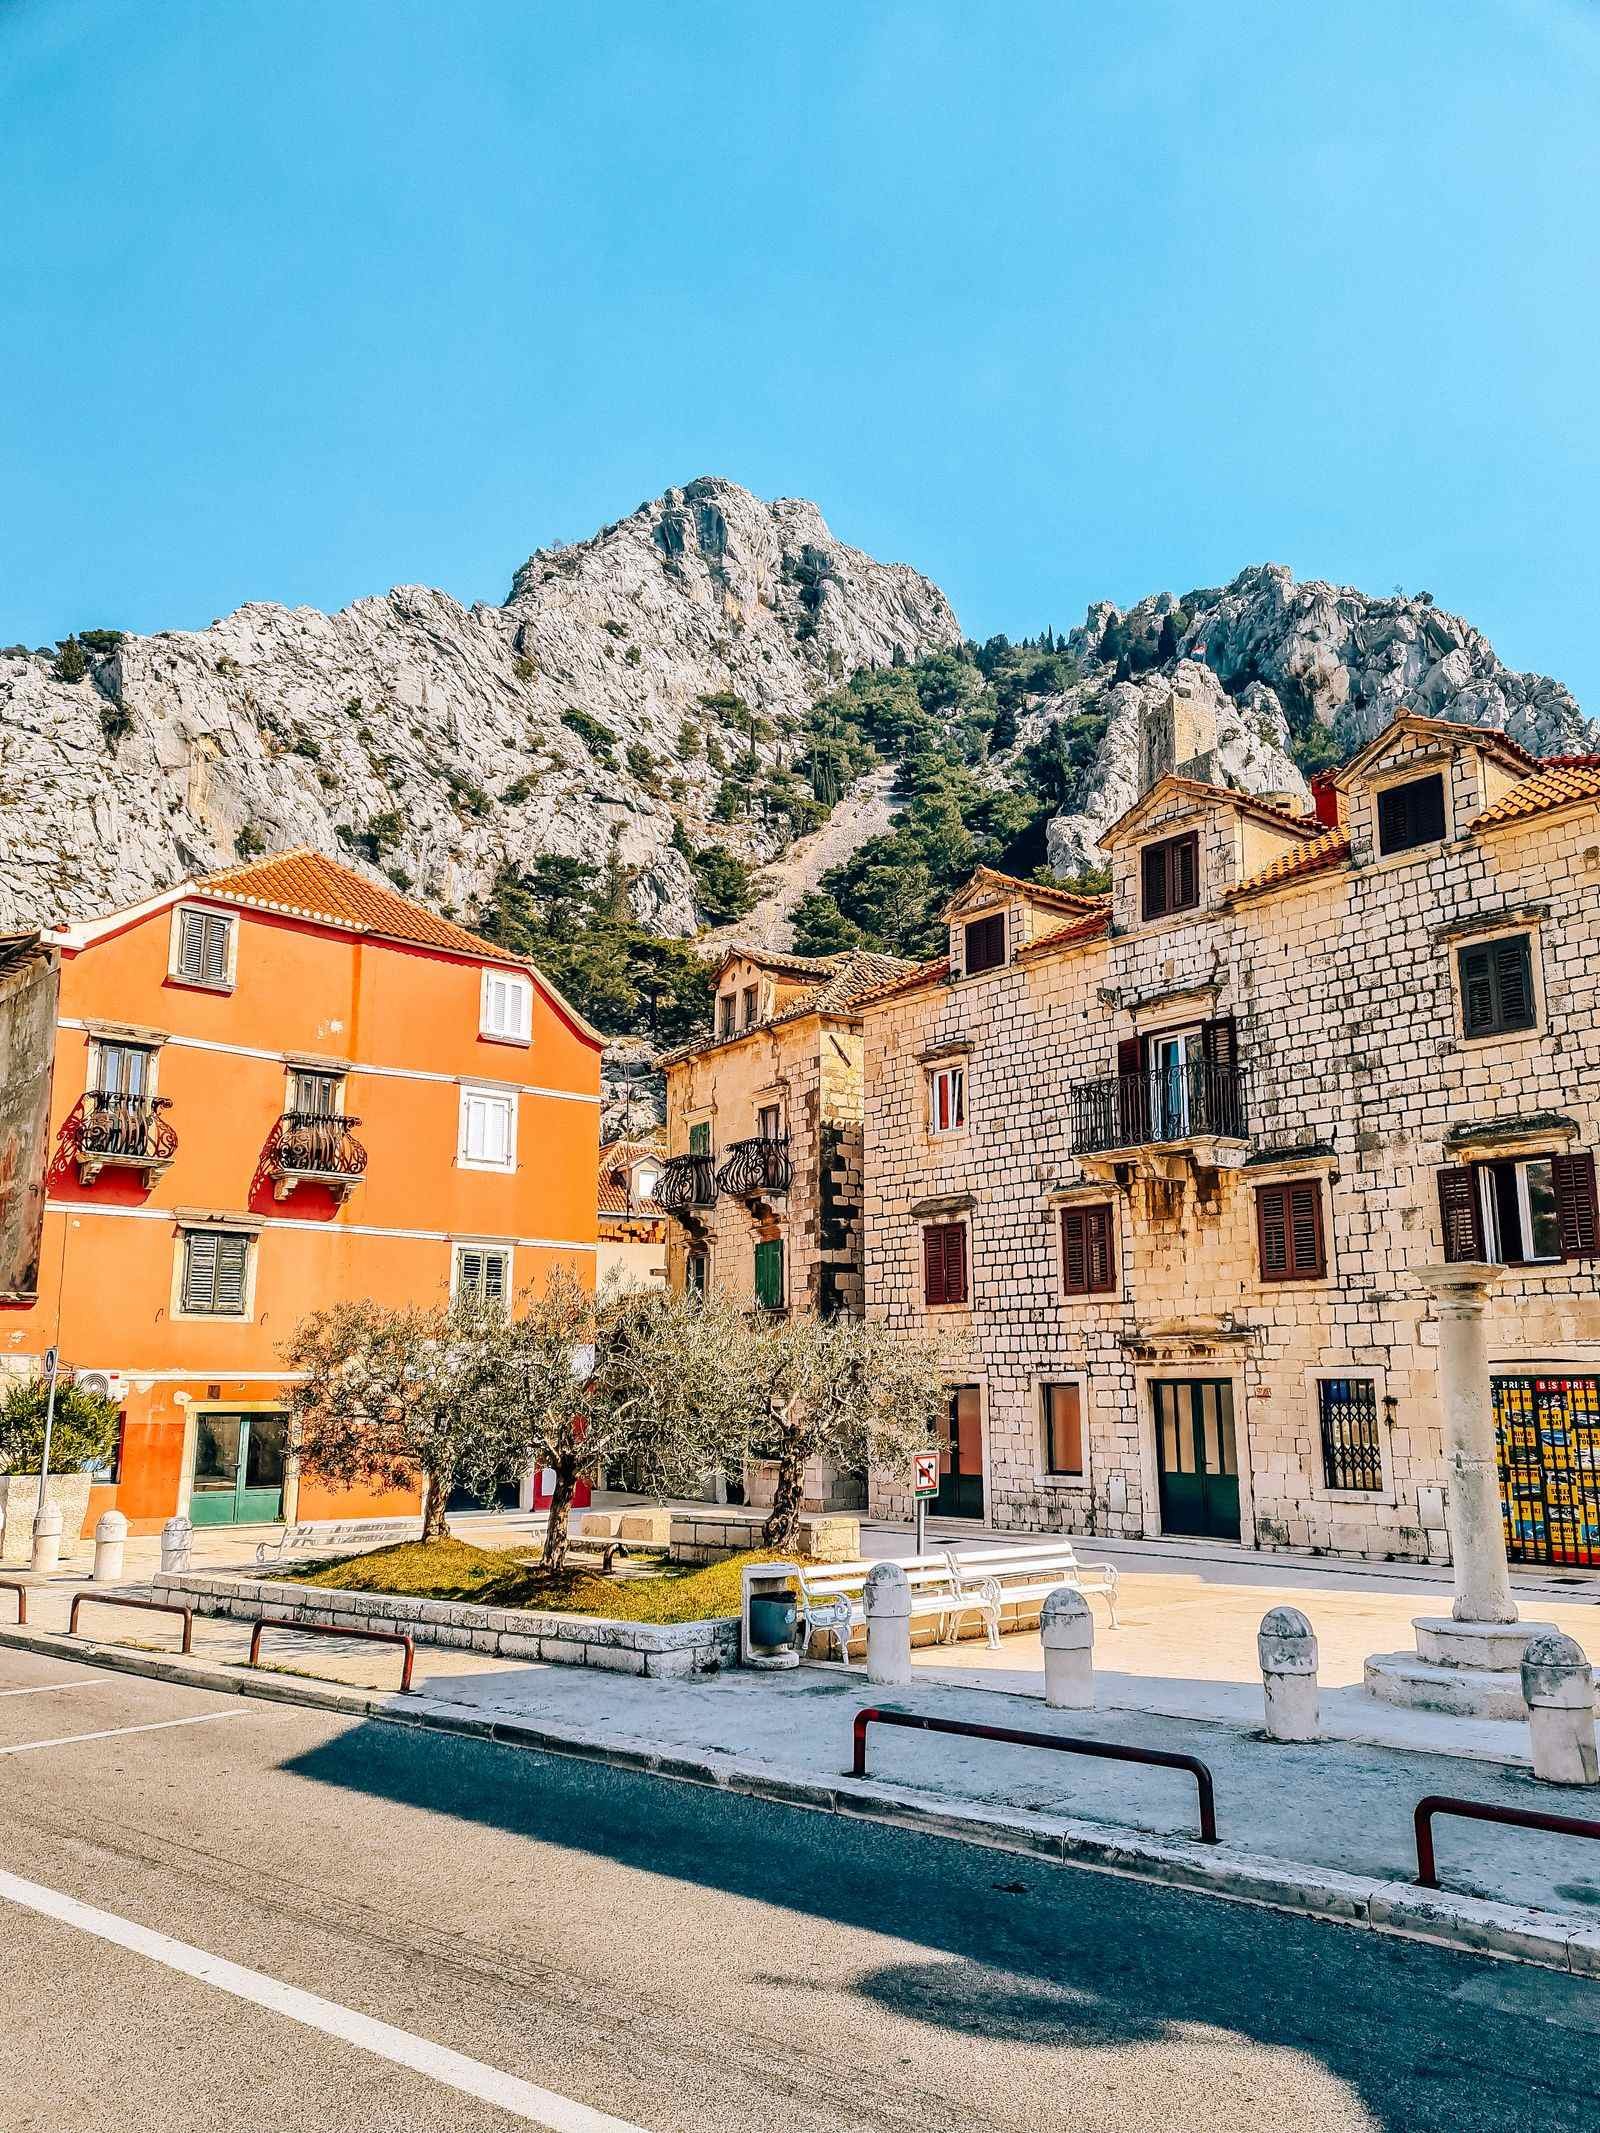 A small square area in the town of Omis, the building on the left is orange, the one on the right is stone and a stone mountain towers in the background with blue sky